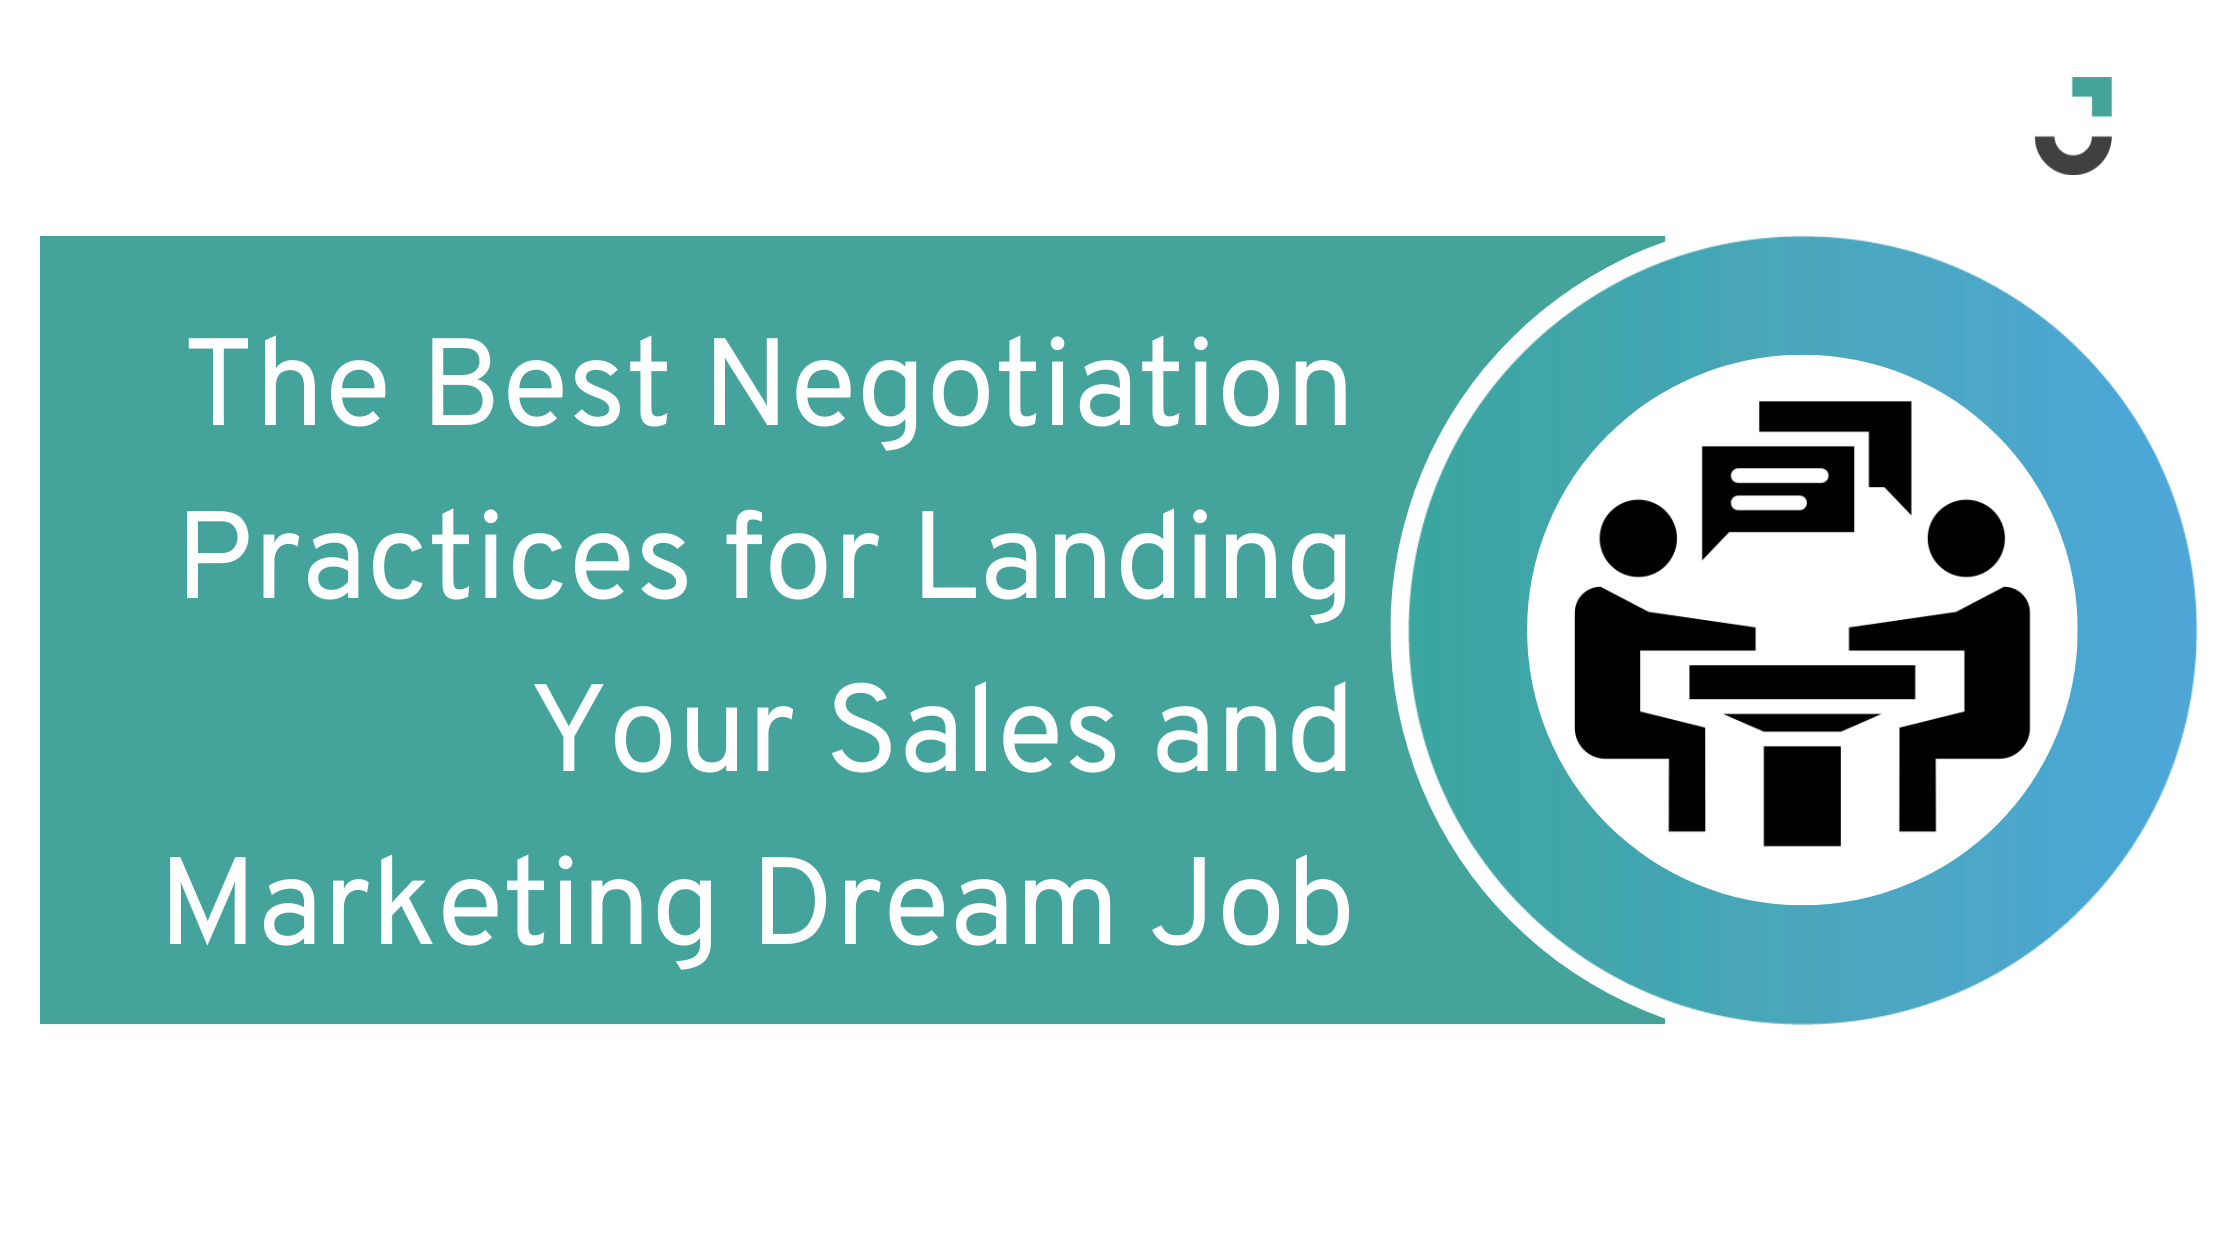 The Best Negotiation Practices for Landing Your Sales and Marketing Dream Job